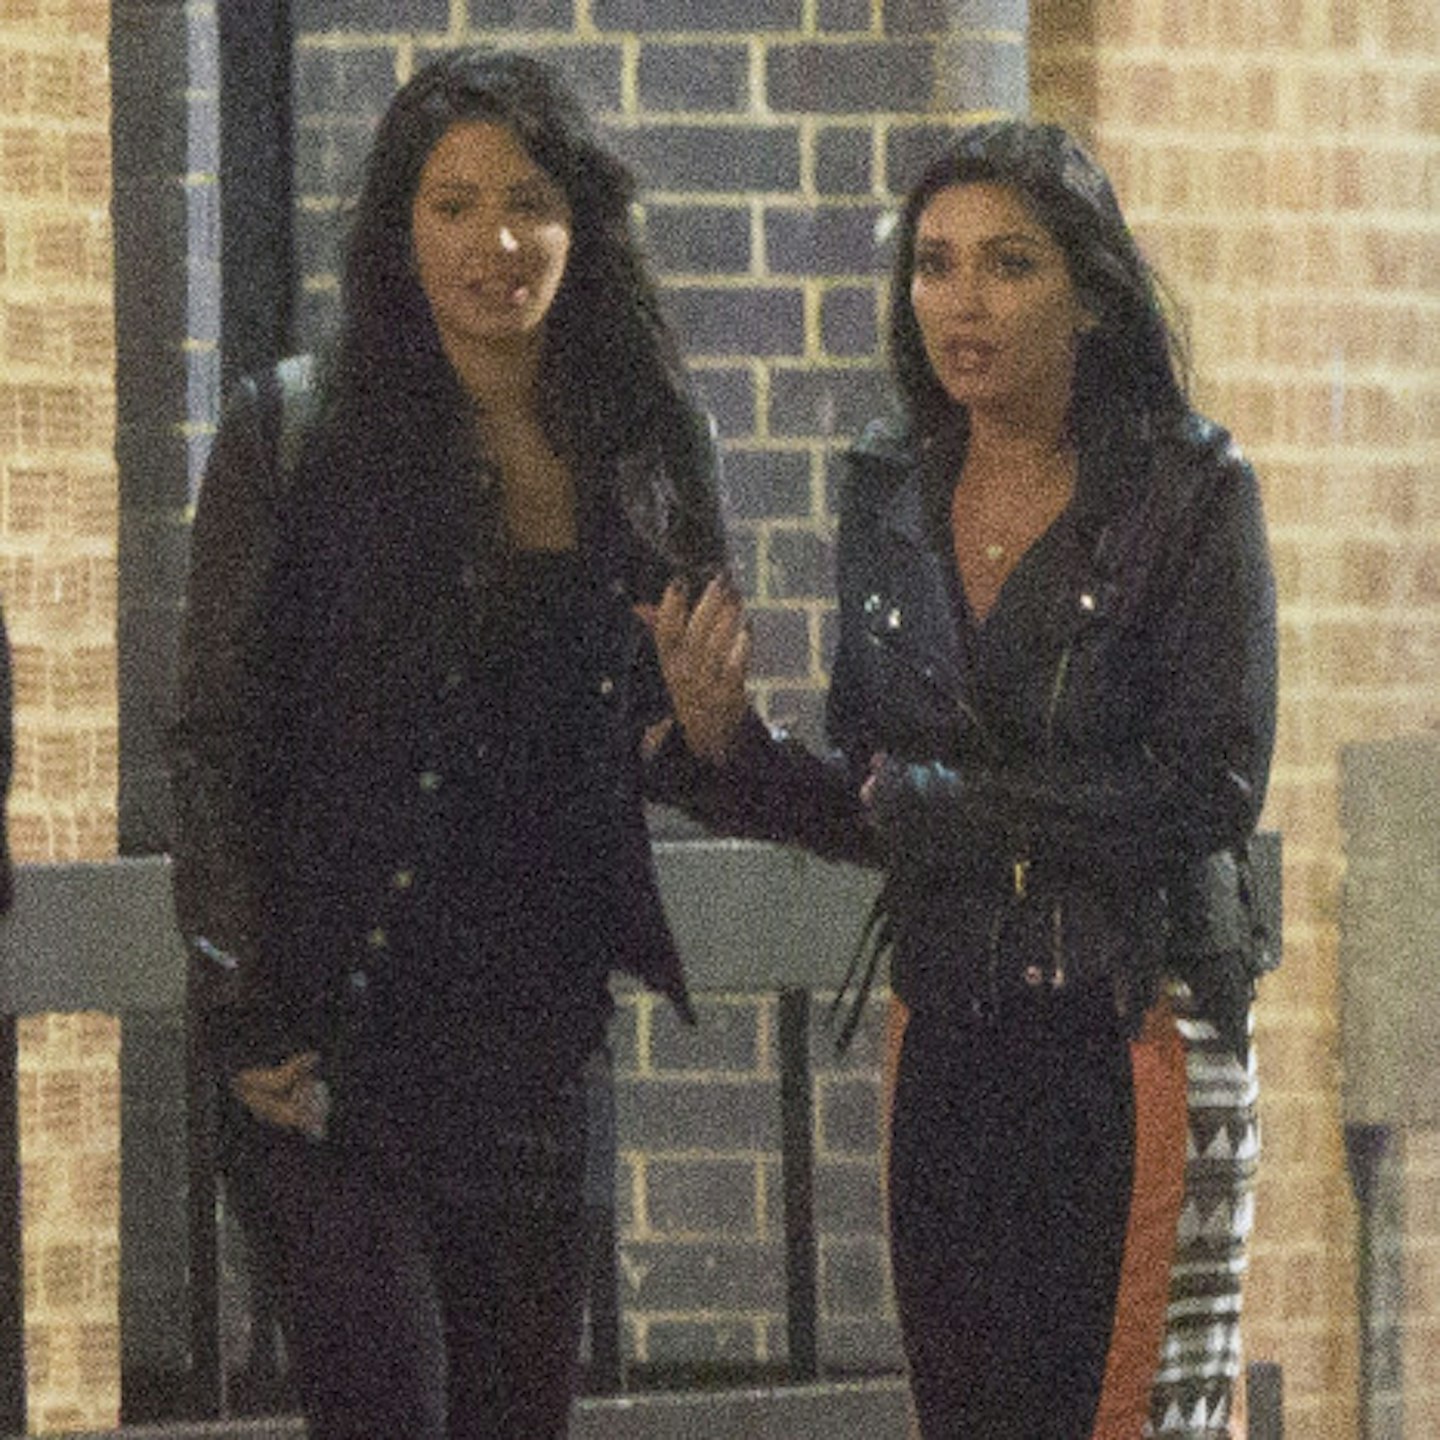 Was Tulisa [pictured with Jasmine Waltz] inspired by cousin Dappy's stint on Celebrity Big Brother?